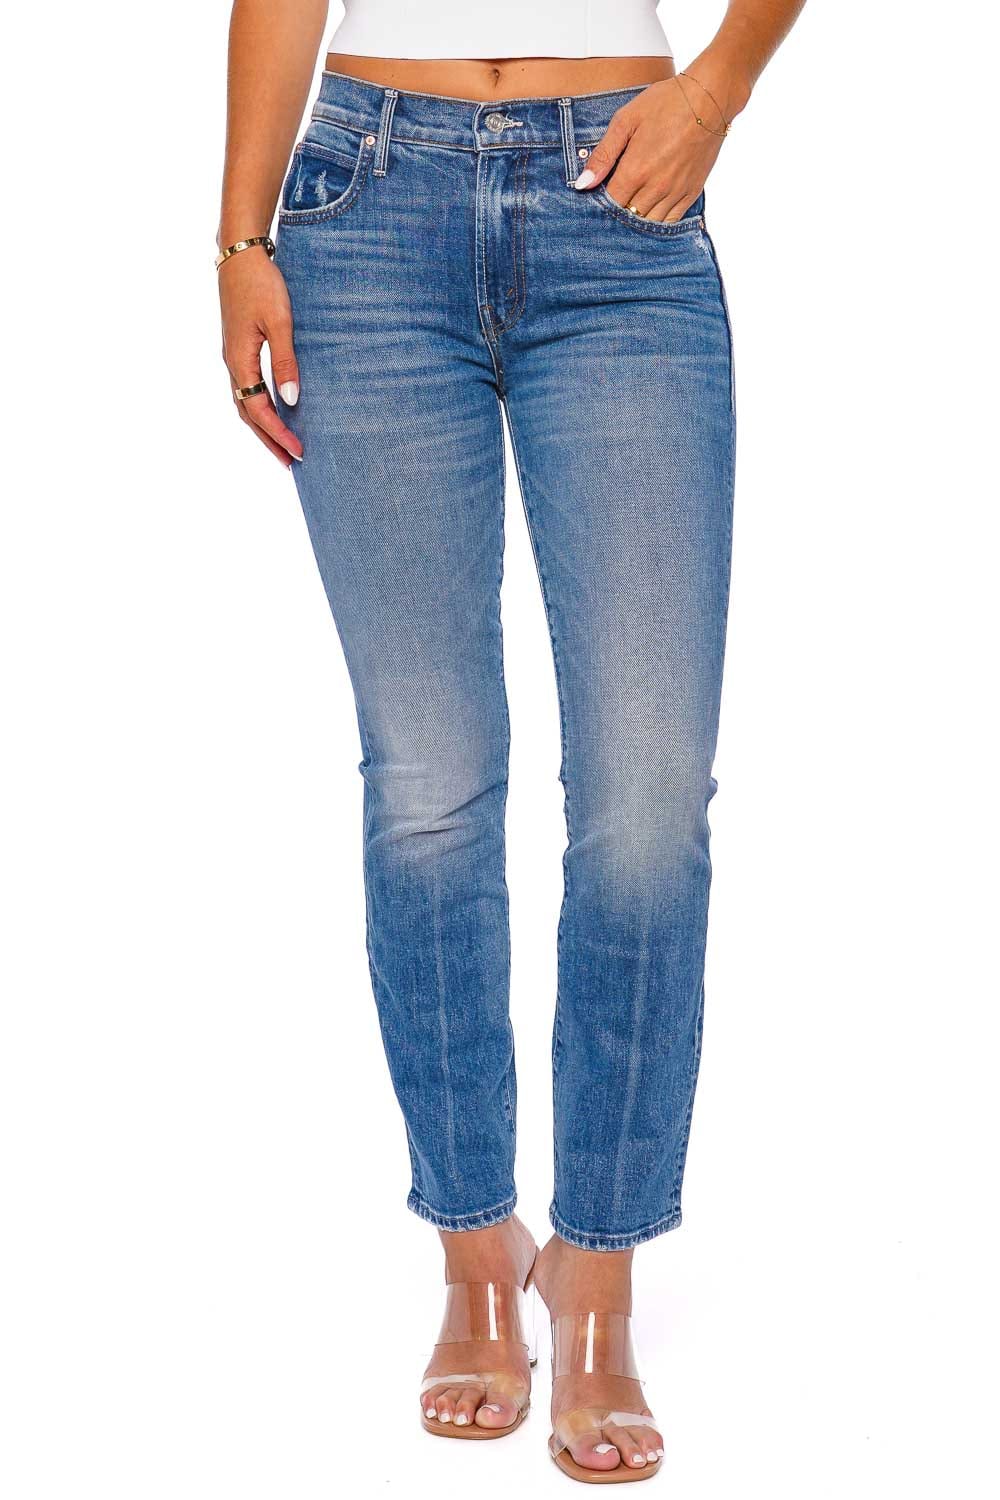 MOTHER Denim The Rascal Mid-Rise Ankle Jeans